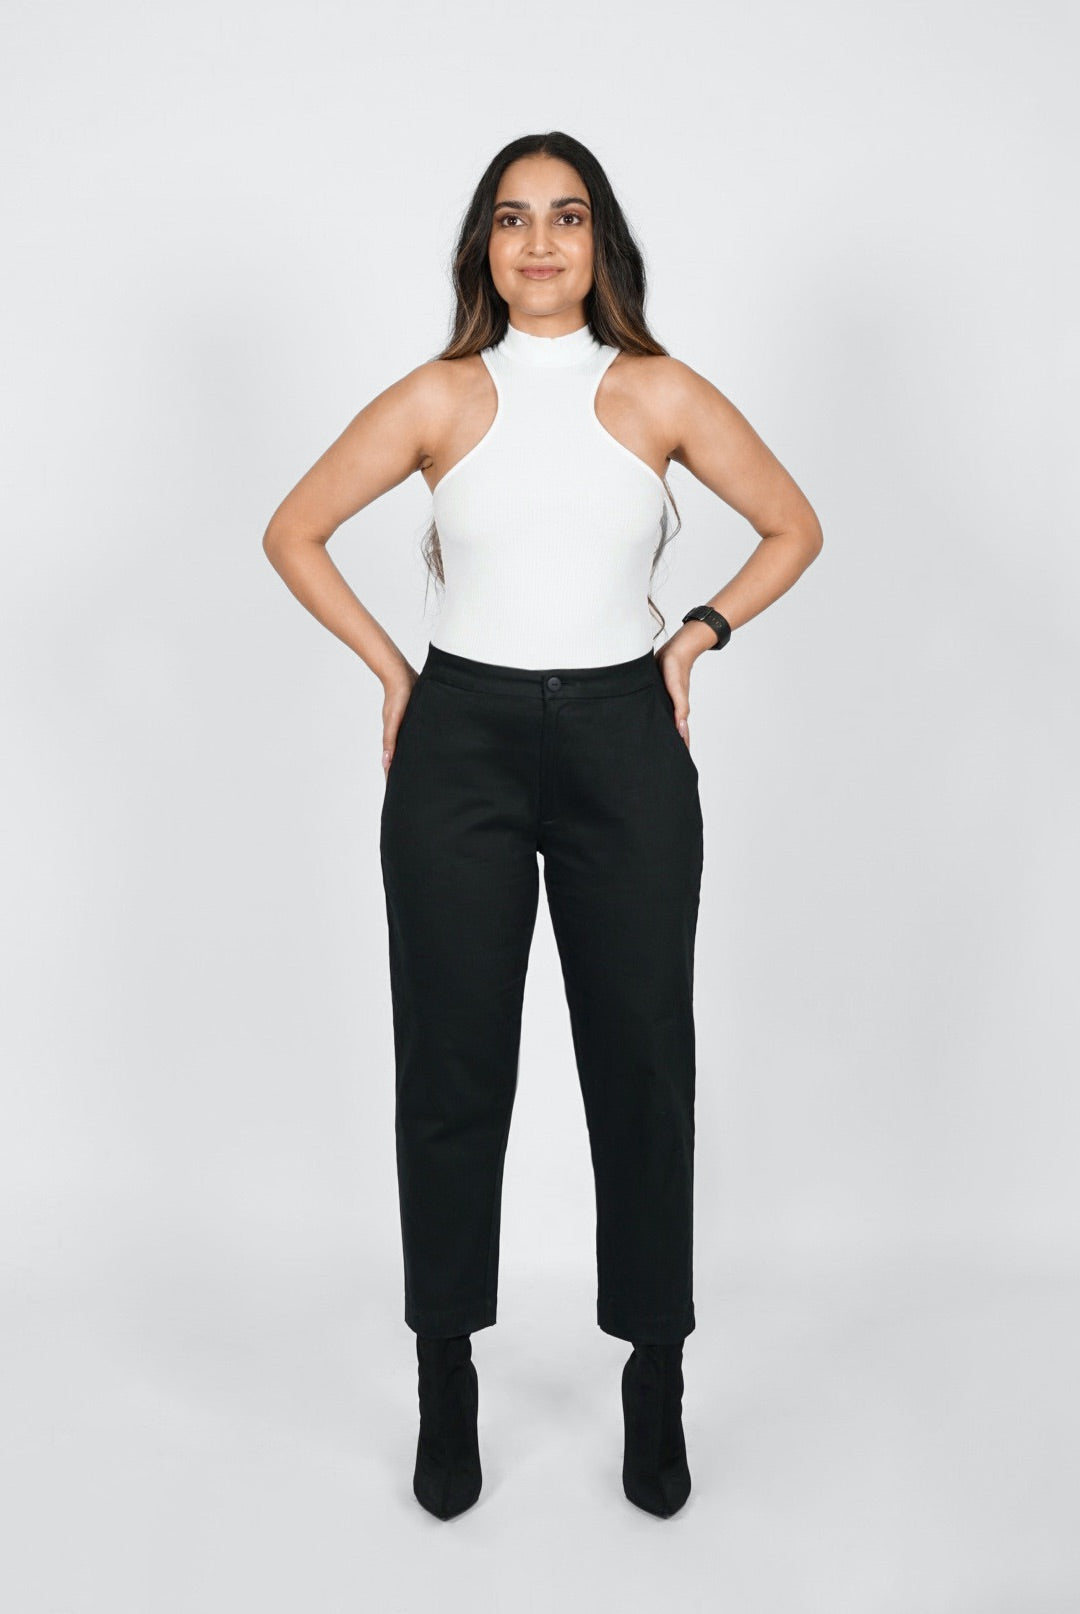 Wide-Leg Trousers Four Ways for Work - Pumps & Push Ups | Wide leg trousers  outfit, Wide leg pants outfit work, Wide leg outfit